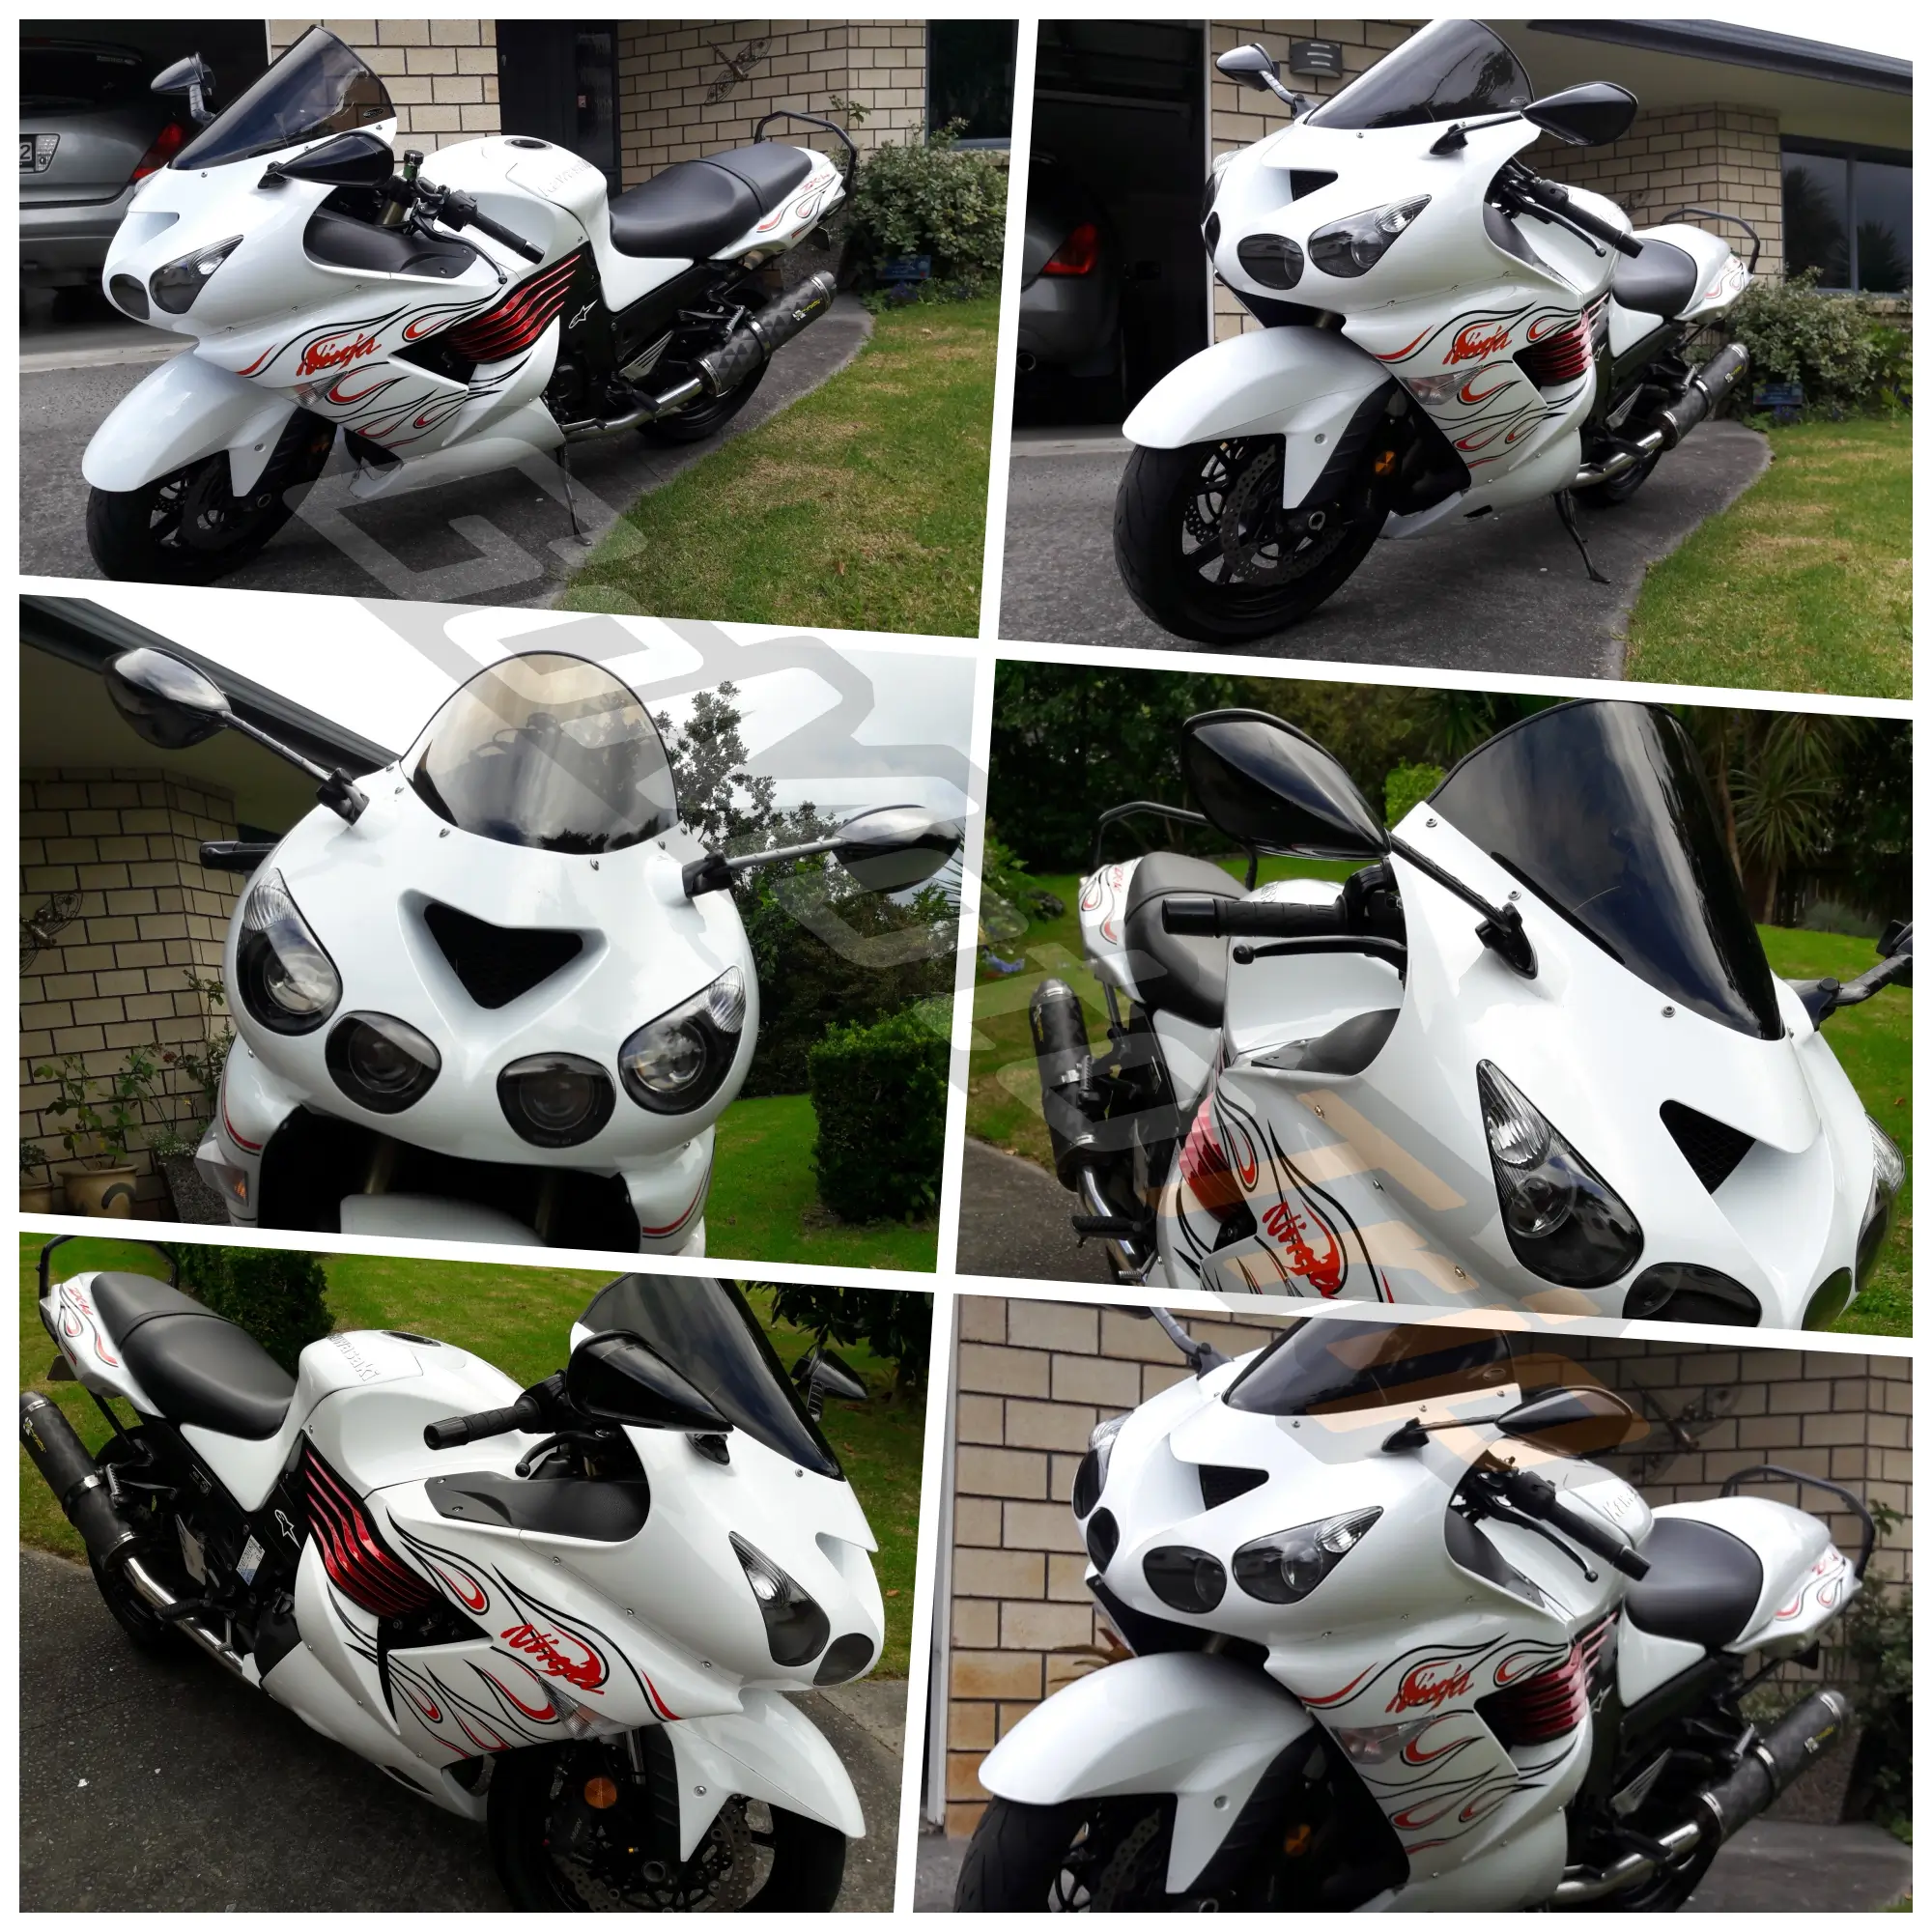 Rider-Review-Kevin-ZX14R-Fairing-1